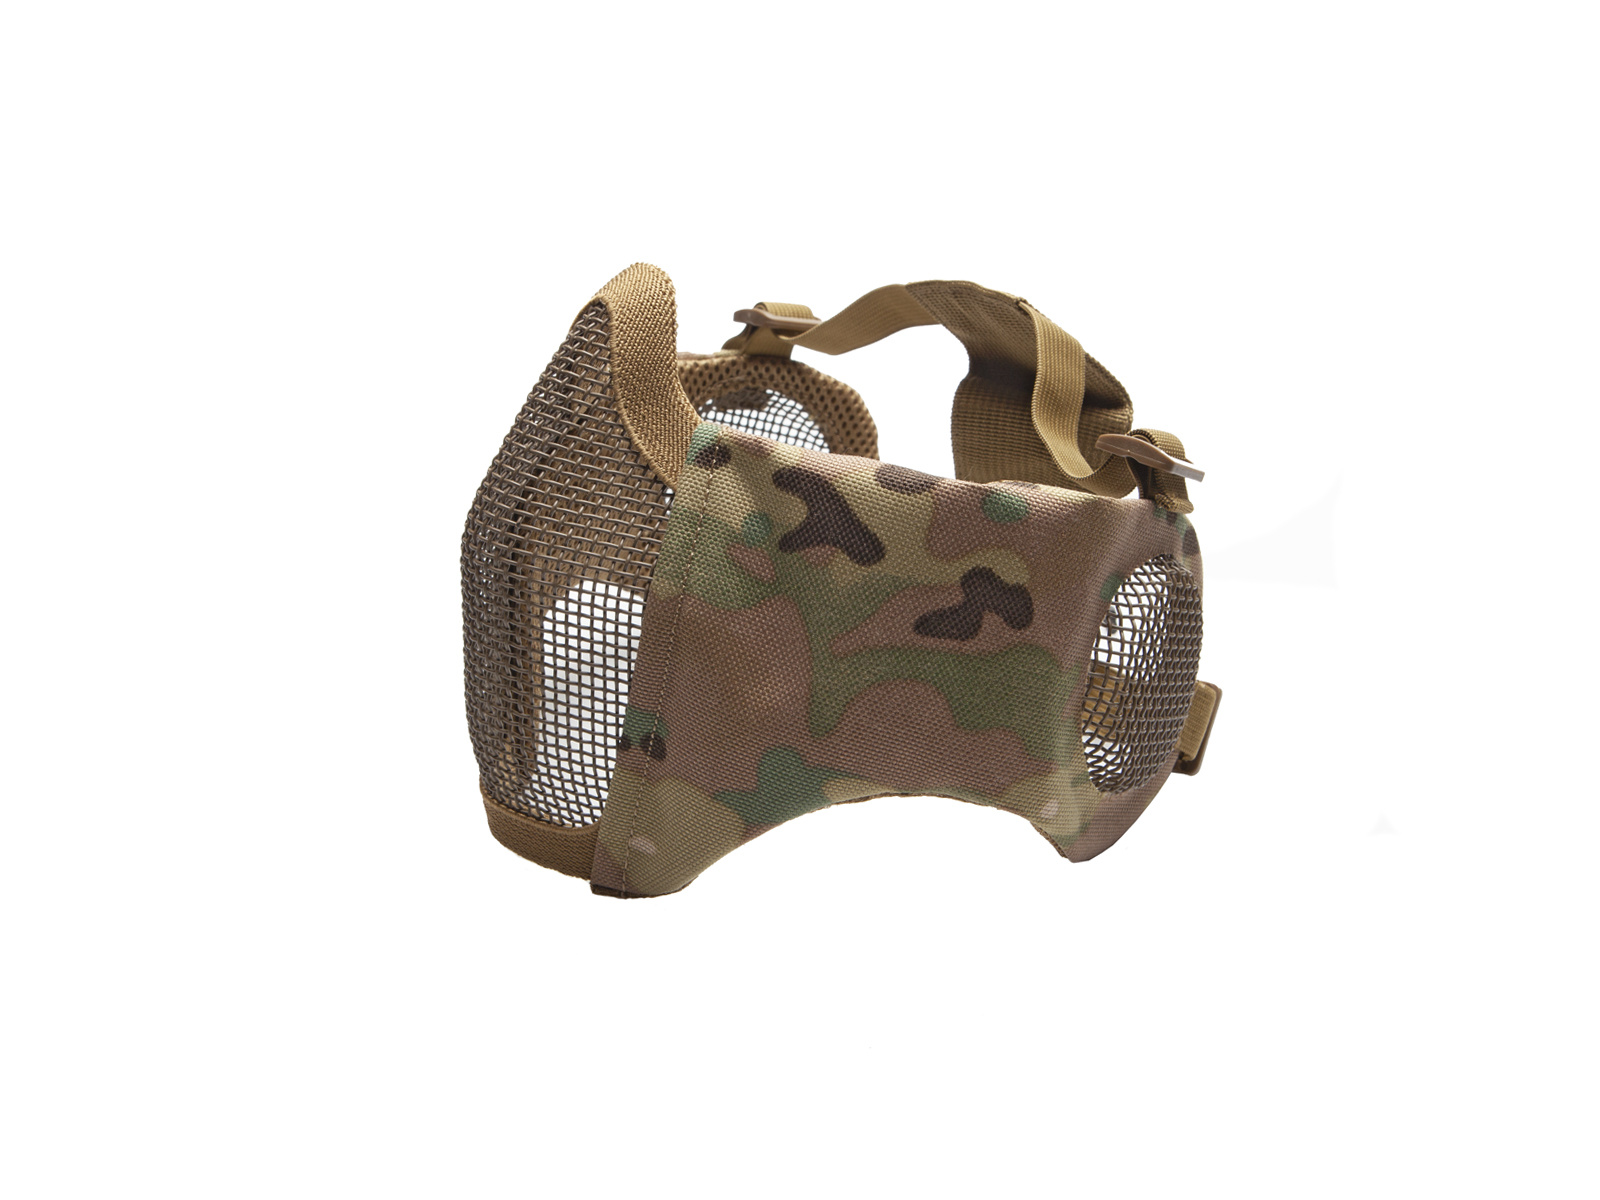 ASG Mesh Mask with cheek pads and ear protection - MC